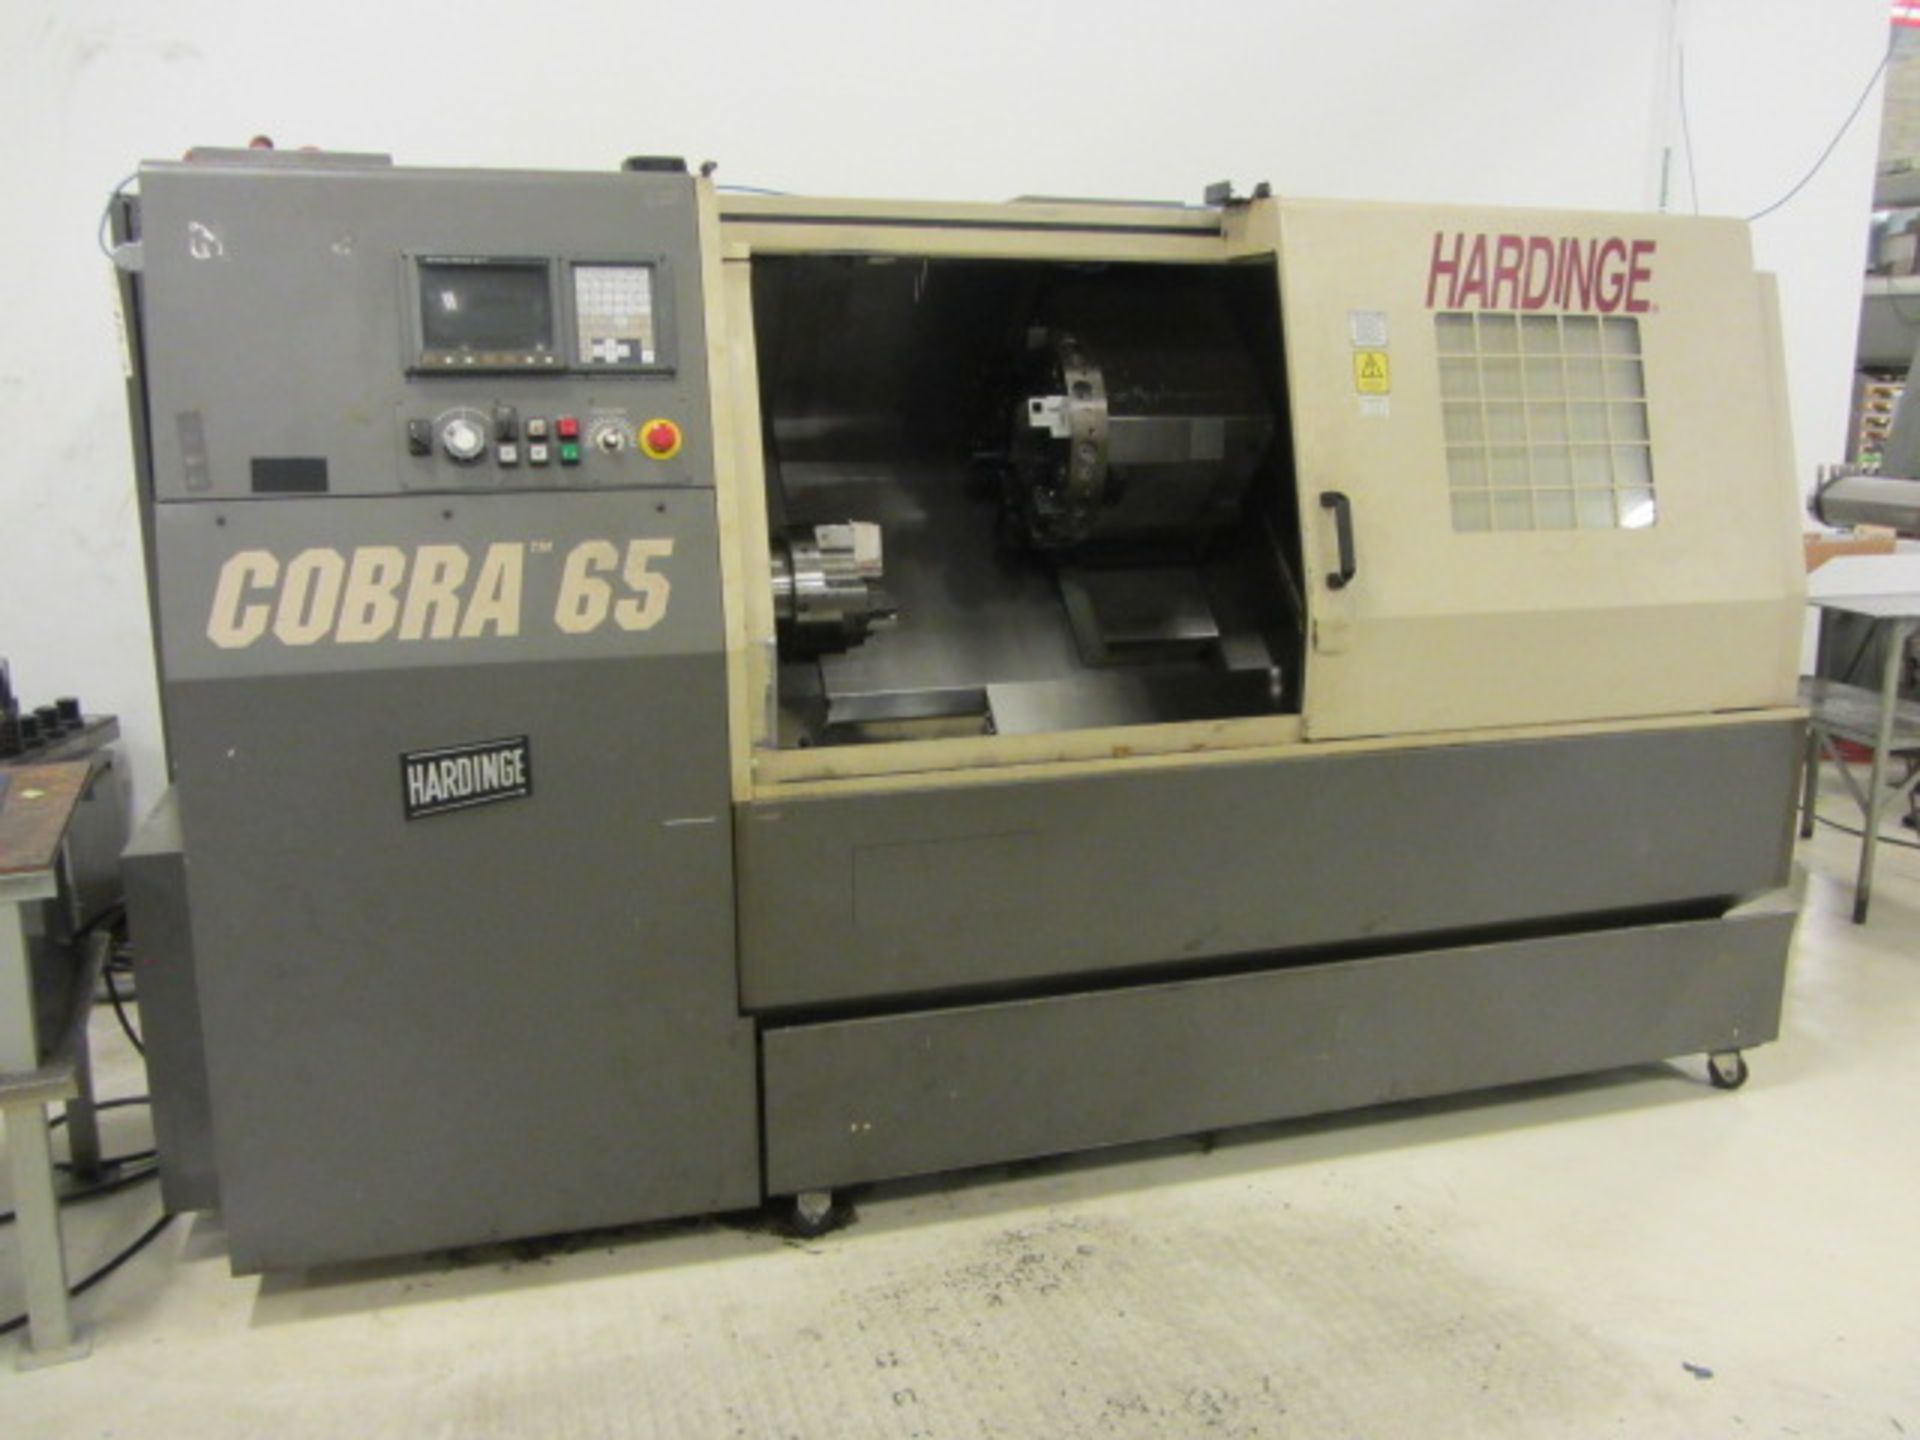 Hardinge Cobra 65 CNC Turning Center with Capacity to 10'' Chuck, 22'' Swing x 31'' Centers to